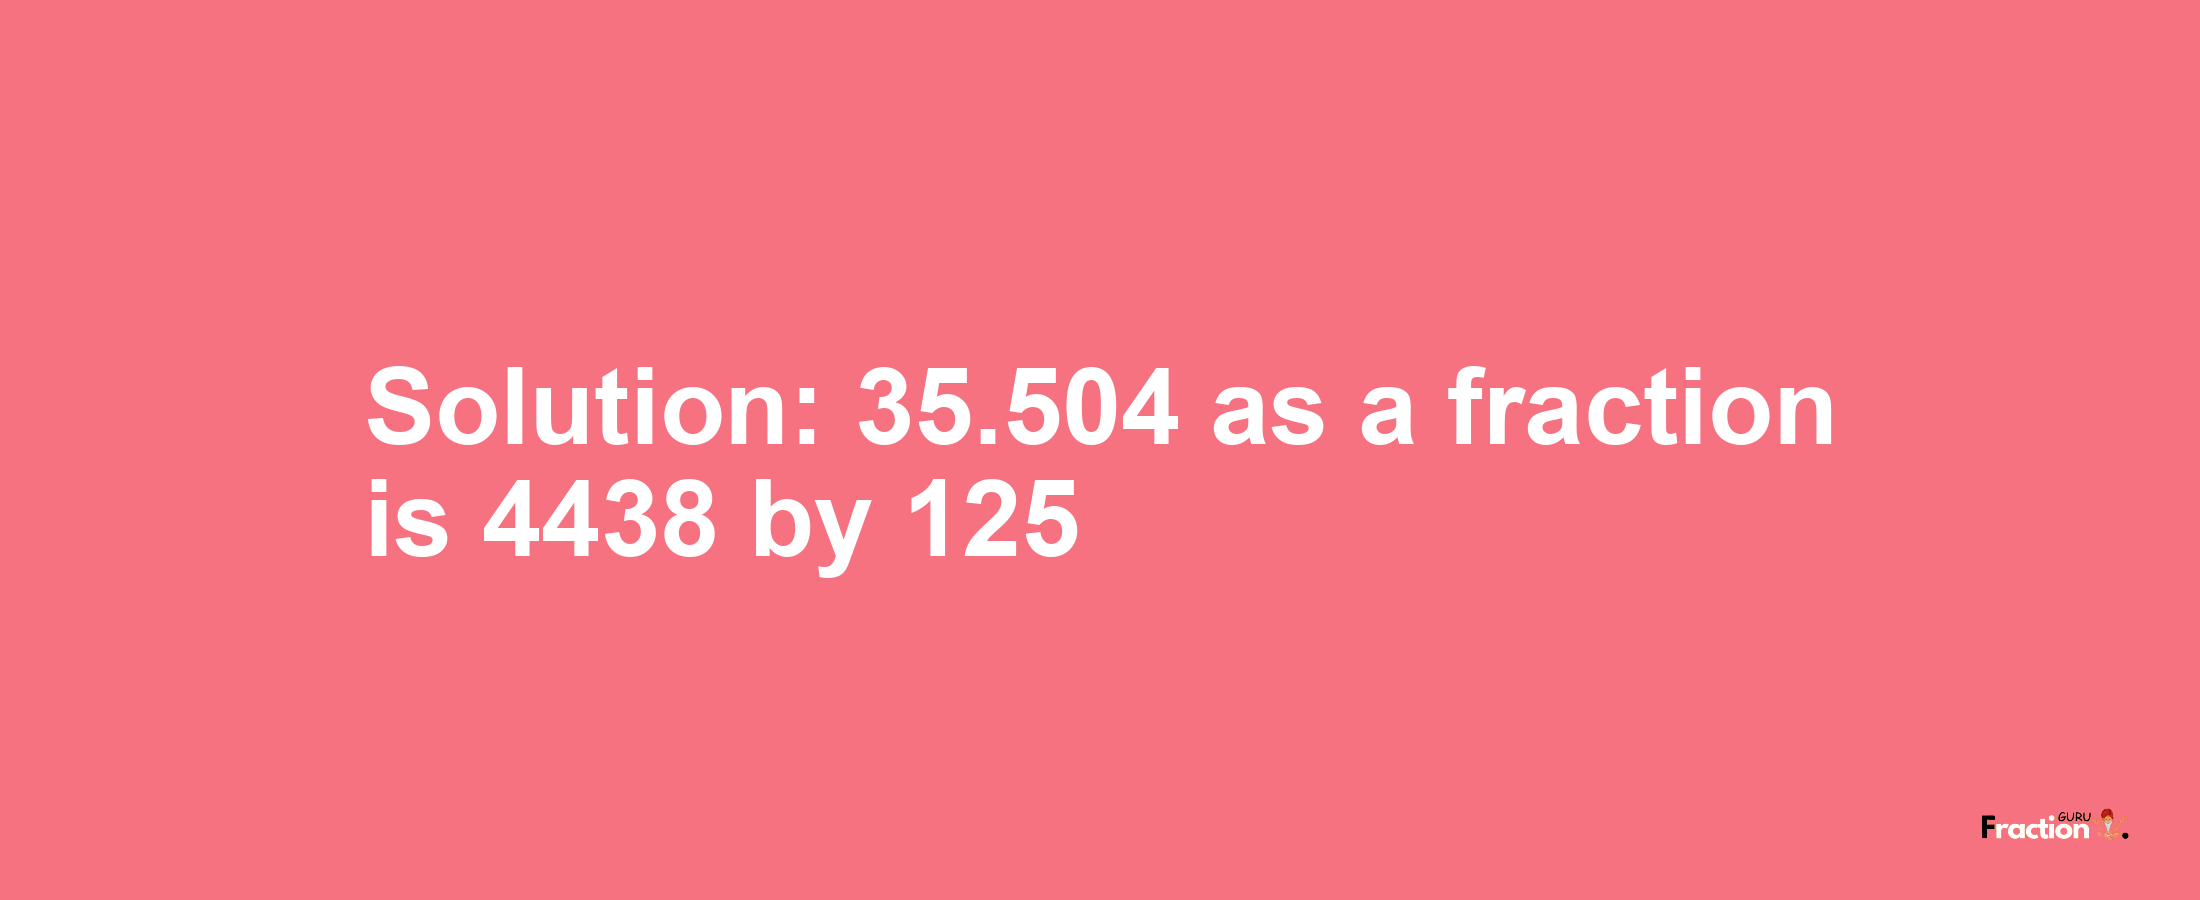 Solution:35.504 as a fraction is 4438/125